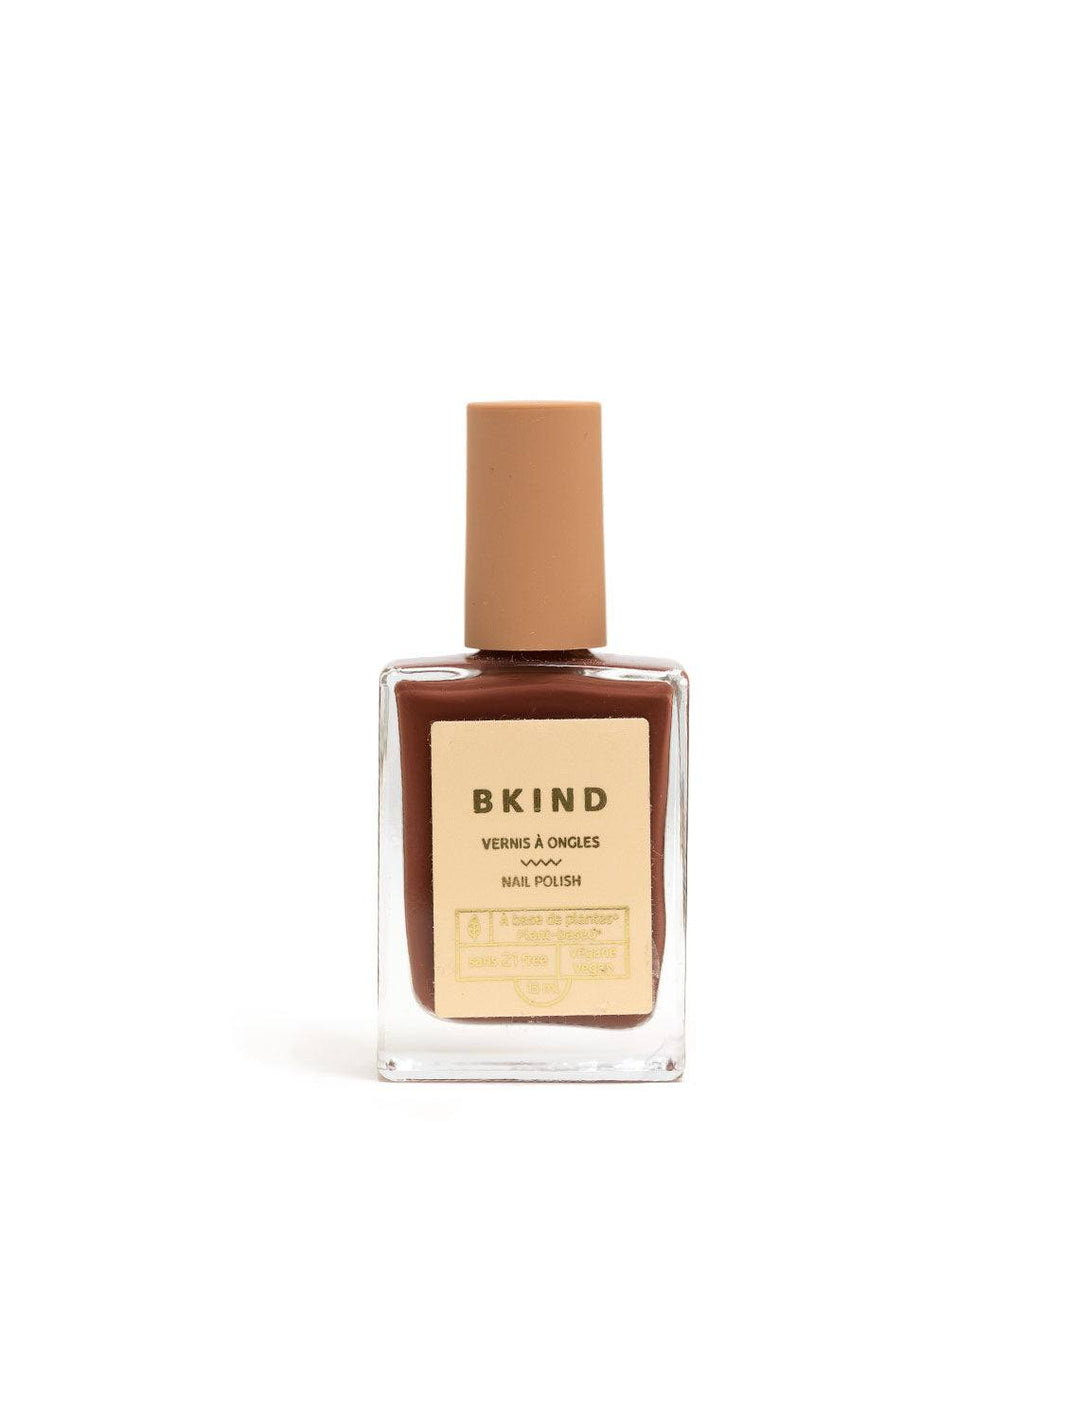 BKIND nail polish in the color grand canyon